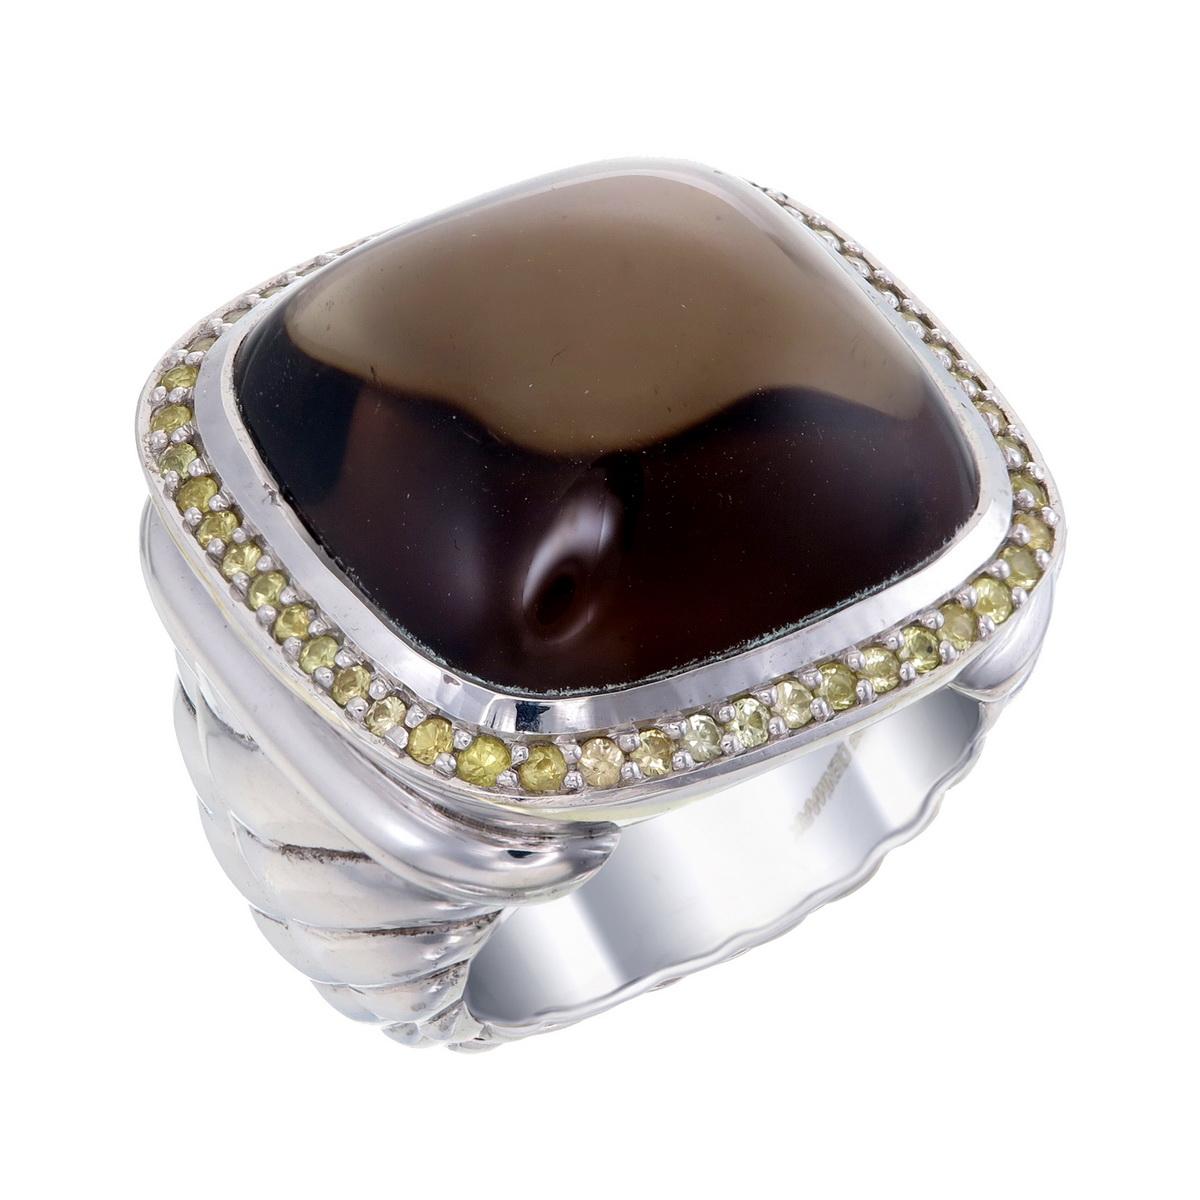 Orloff of Denmark; Sterling Silver Statement Ring set with a huge Smoky Quartz surrounded by a total of 0.50 carats of Yellow Sapphires.

Introducing a striking 925 silver statement ring that effortlessly captures attention. 
This ring boasts a